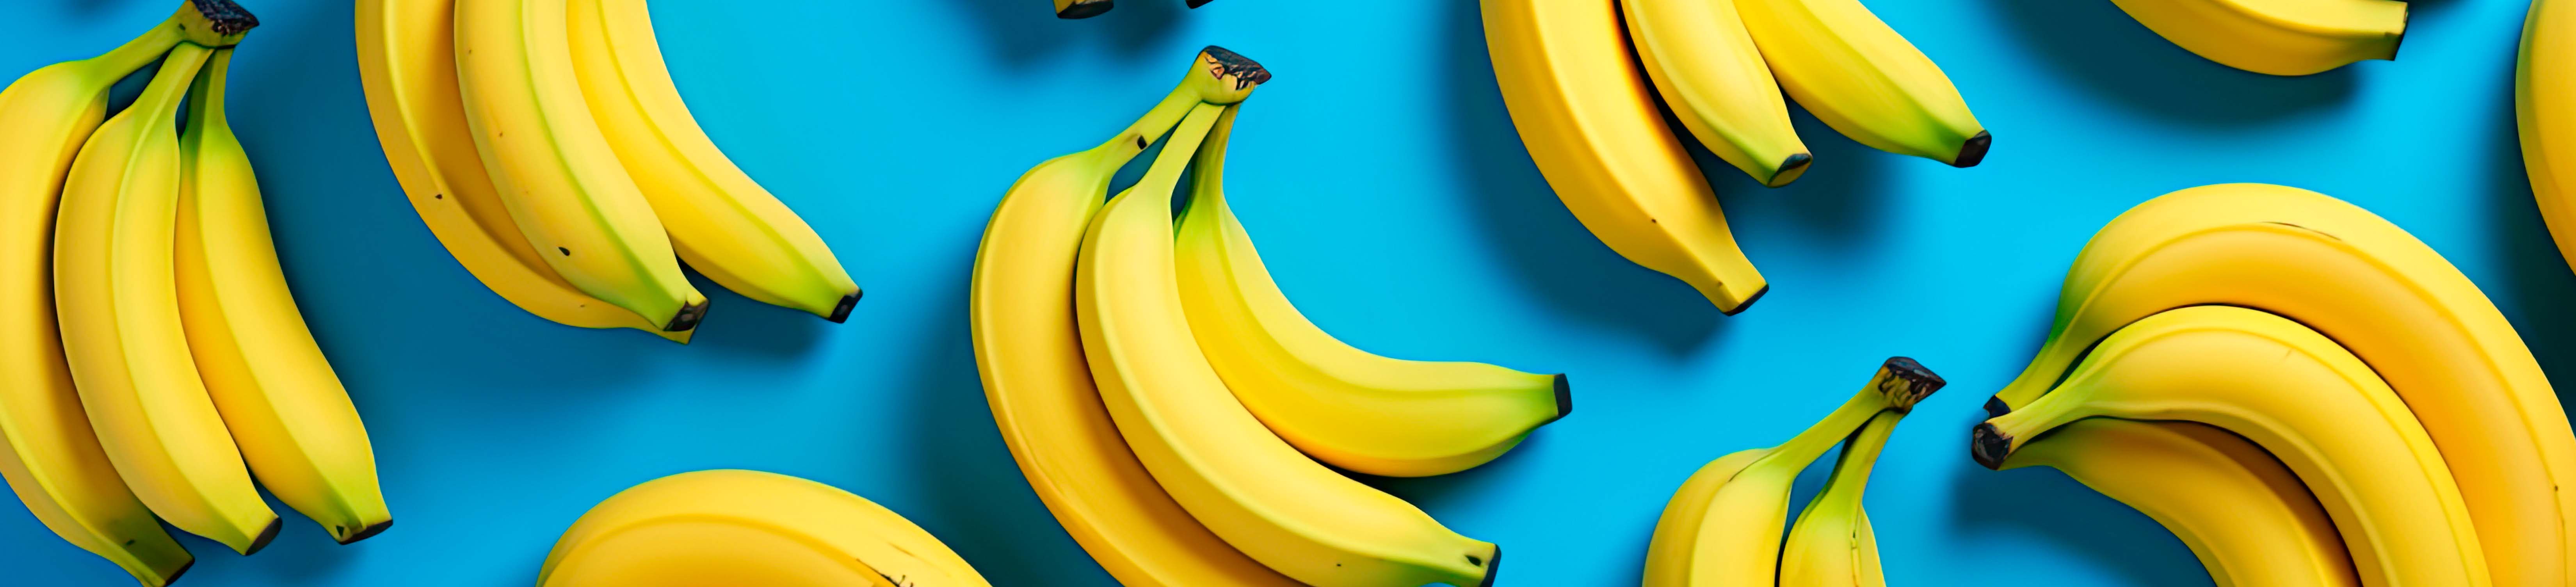 Banana Flavored Vapes Collection Banner